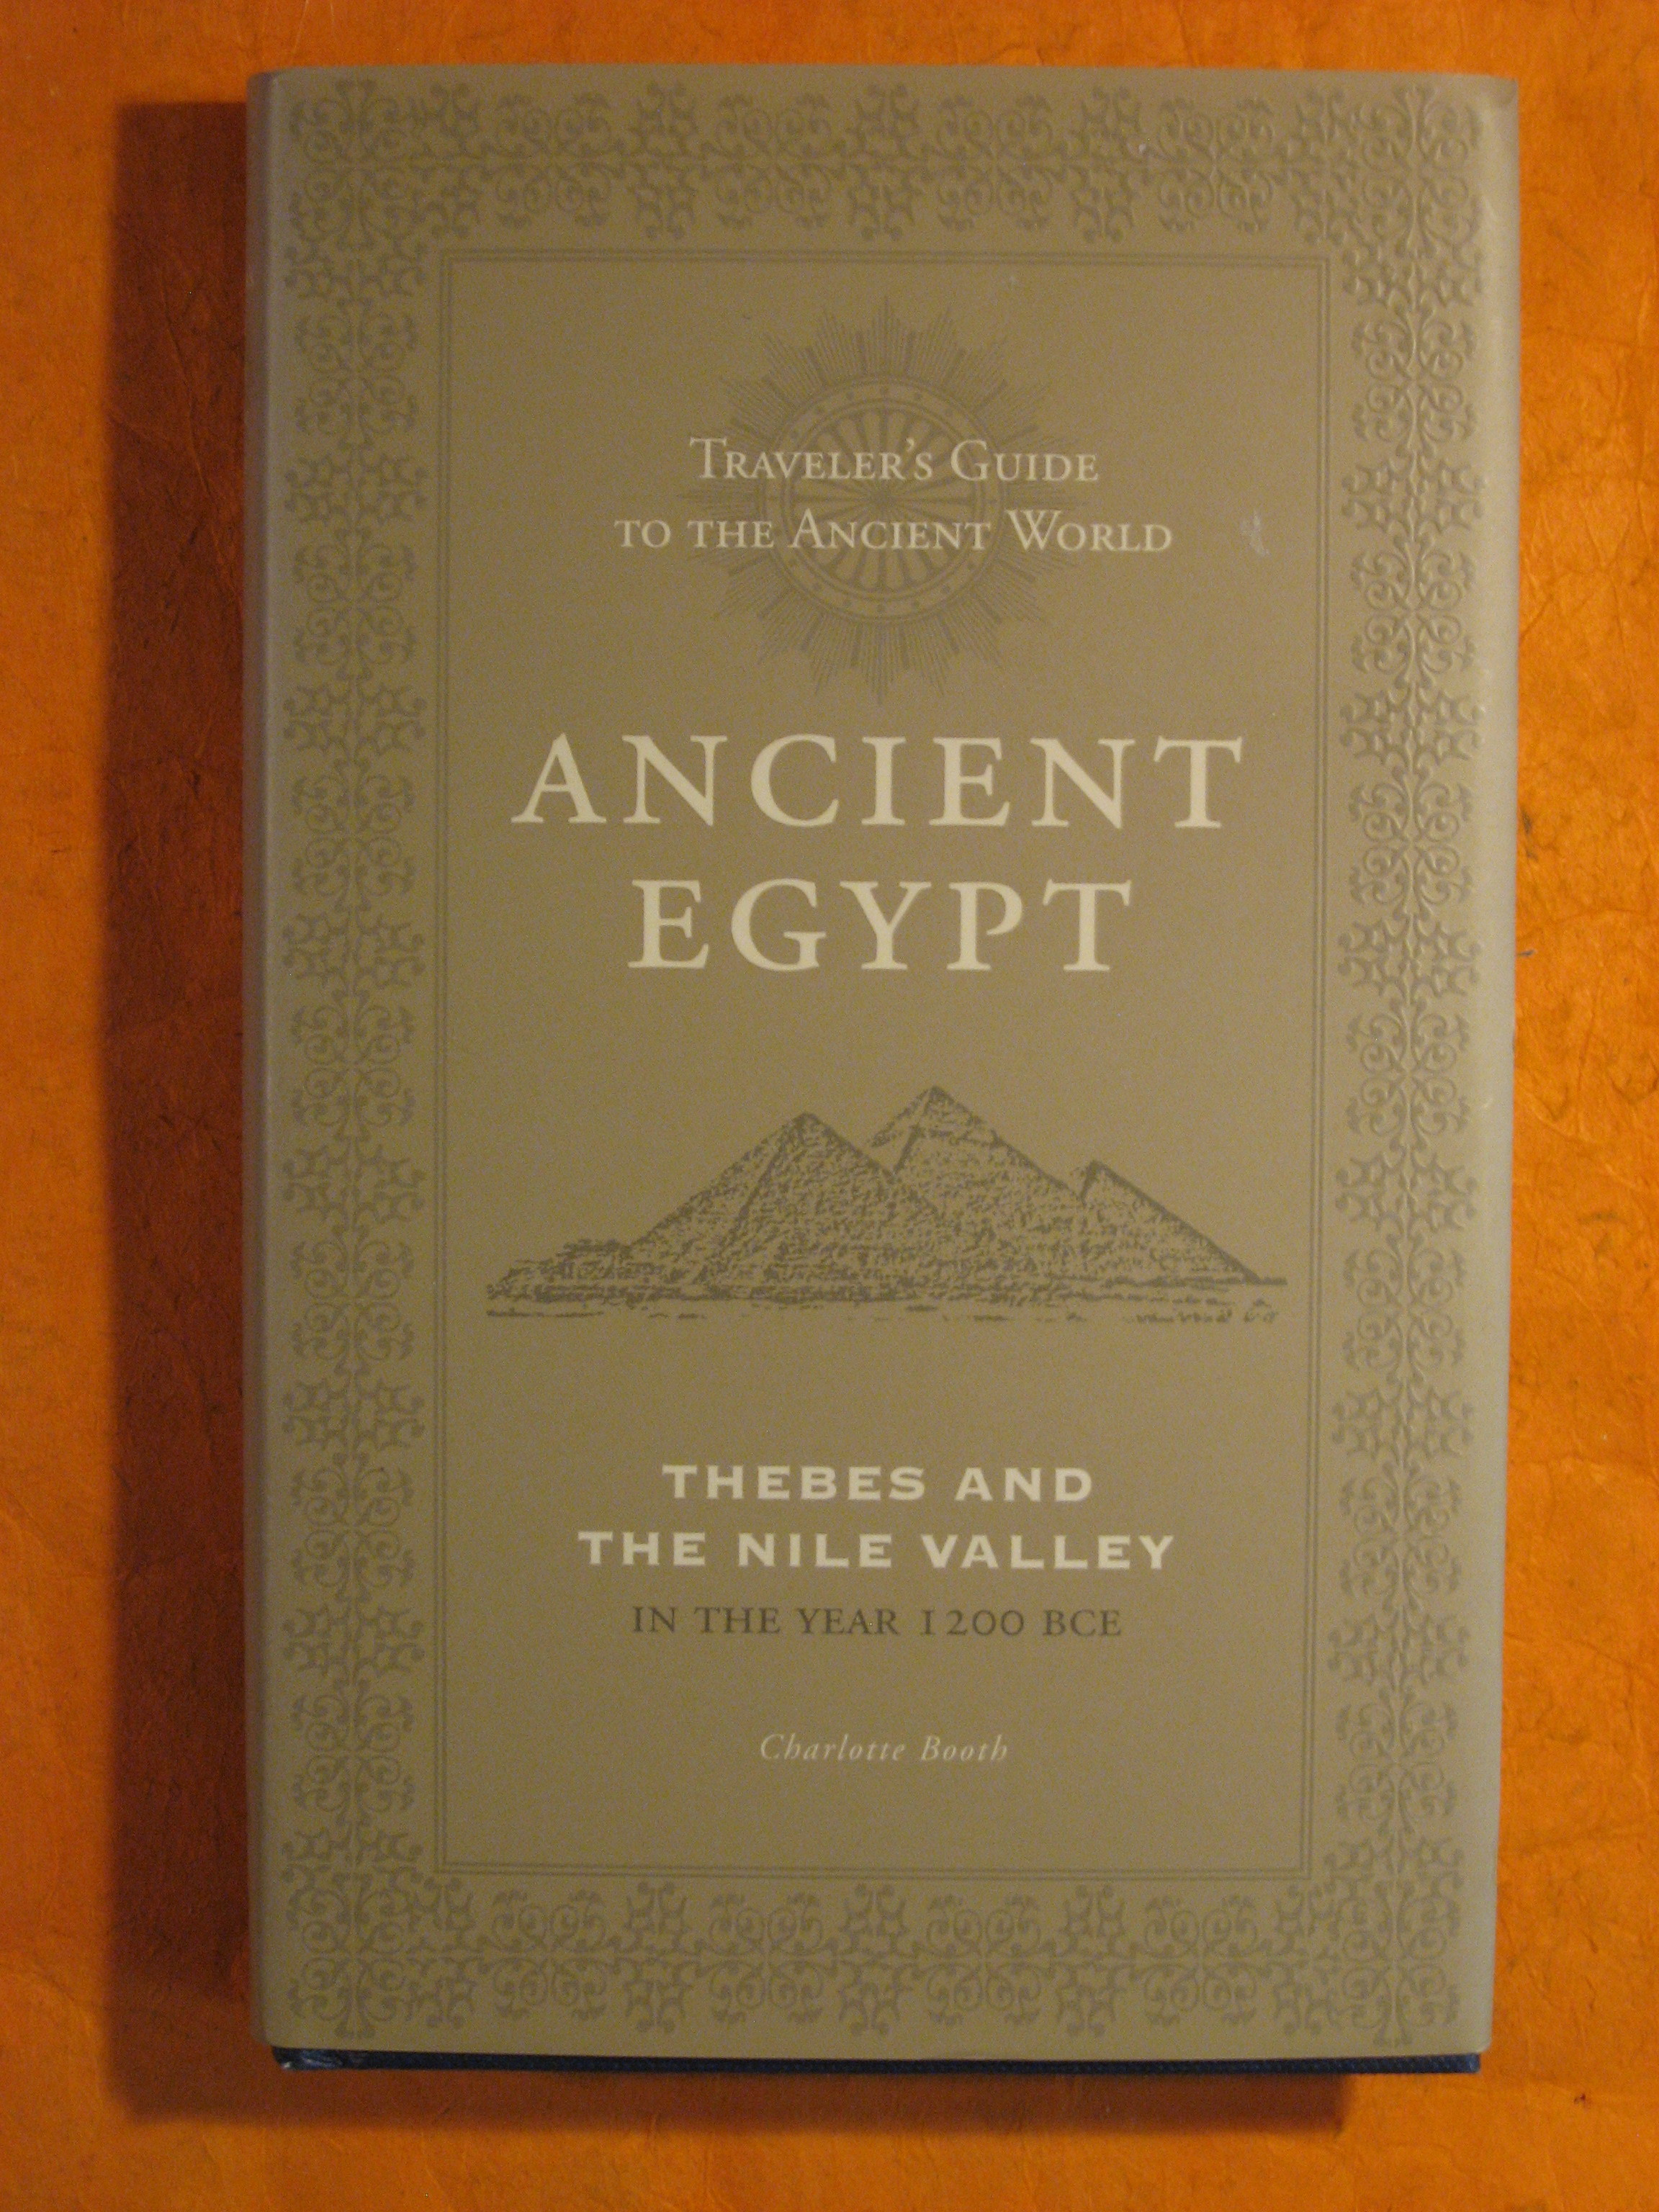 Image for Traveler's Guide to the Ancient World,:  Ancient Egypt, Thebes and the Nile Valley in the Year 1200 BCE